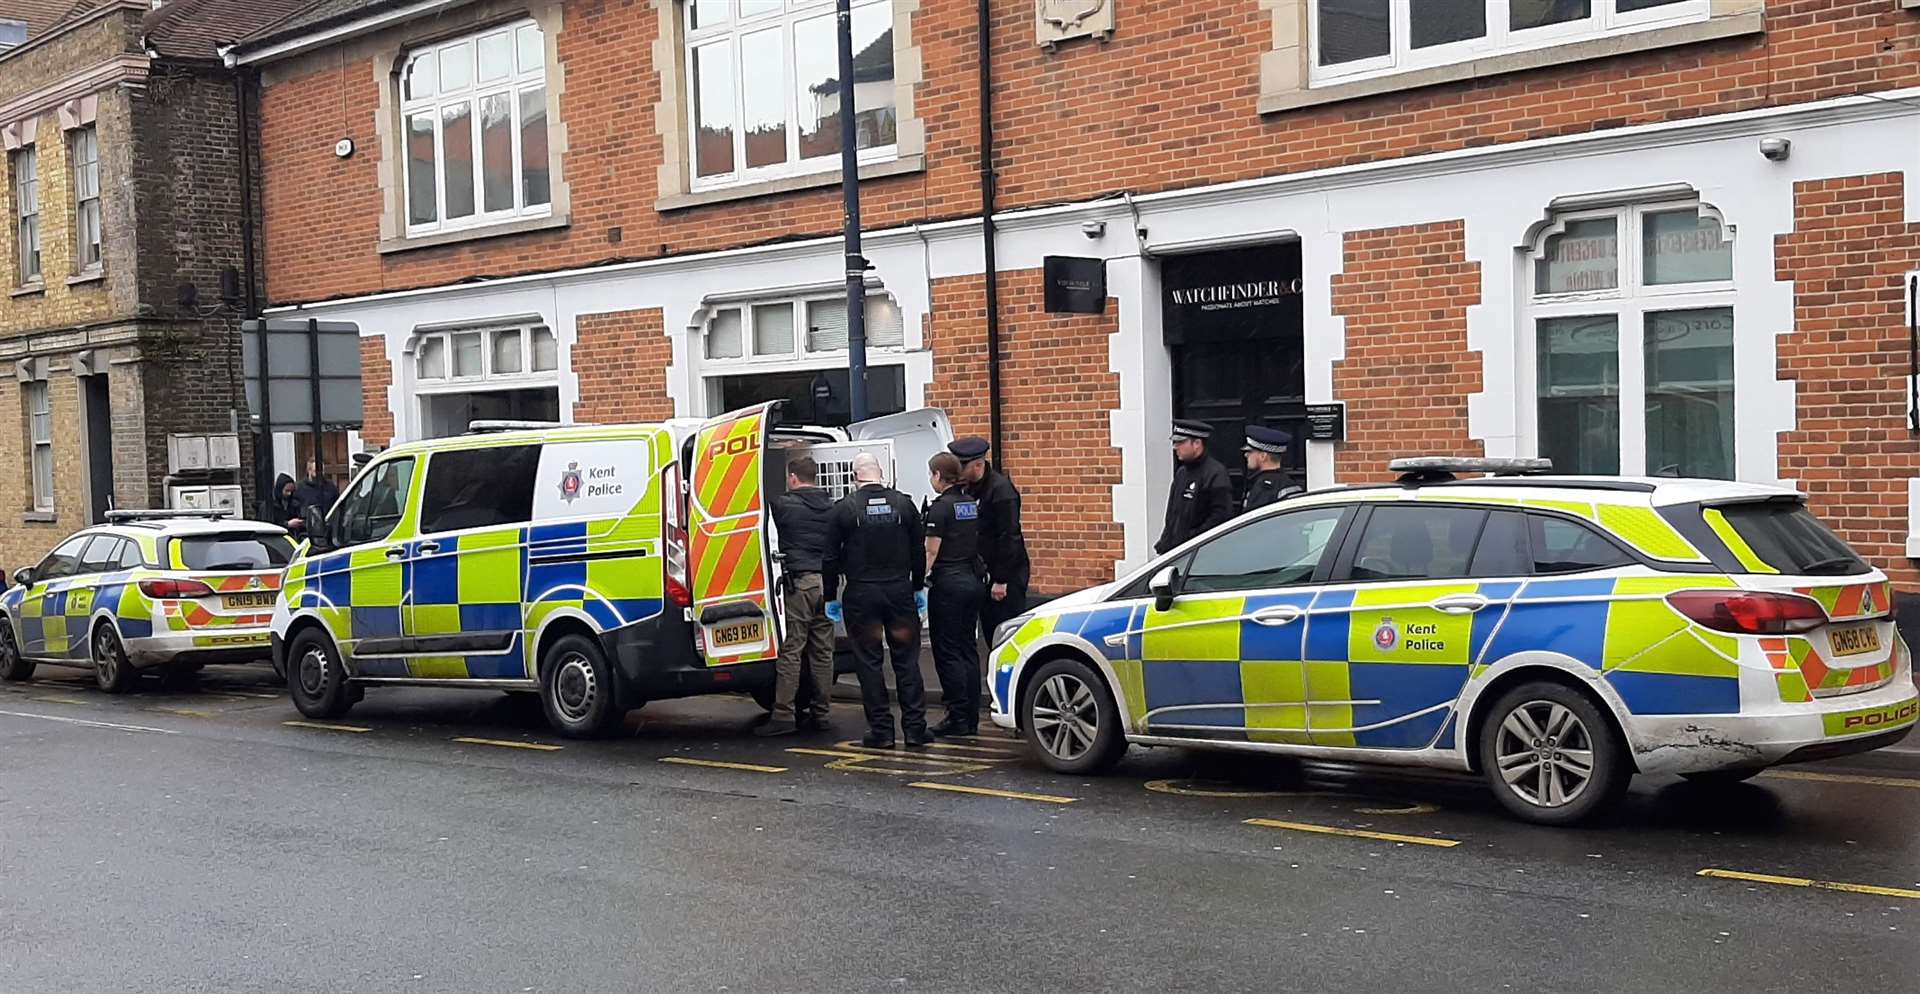 Officers arrested a man on suspicion of theft at Pudding Lane, Maidstone